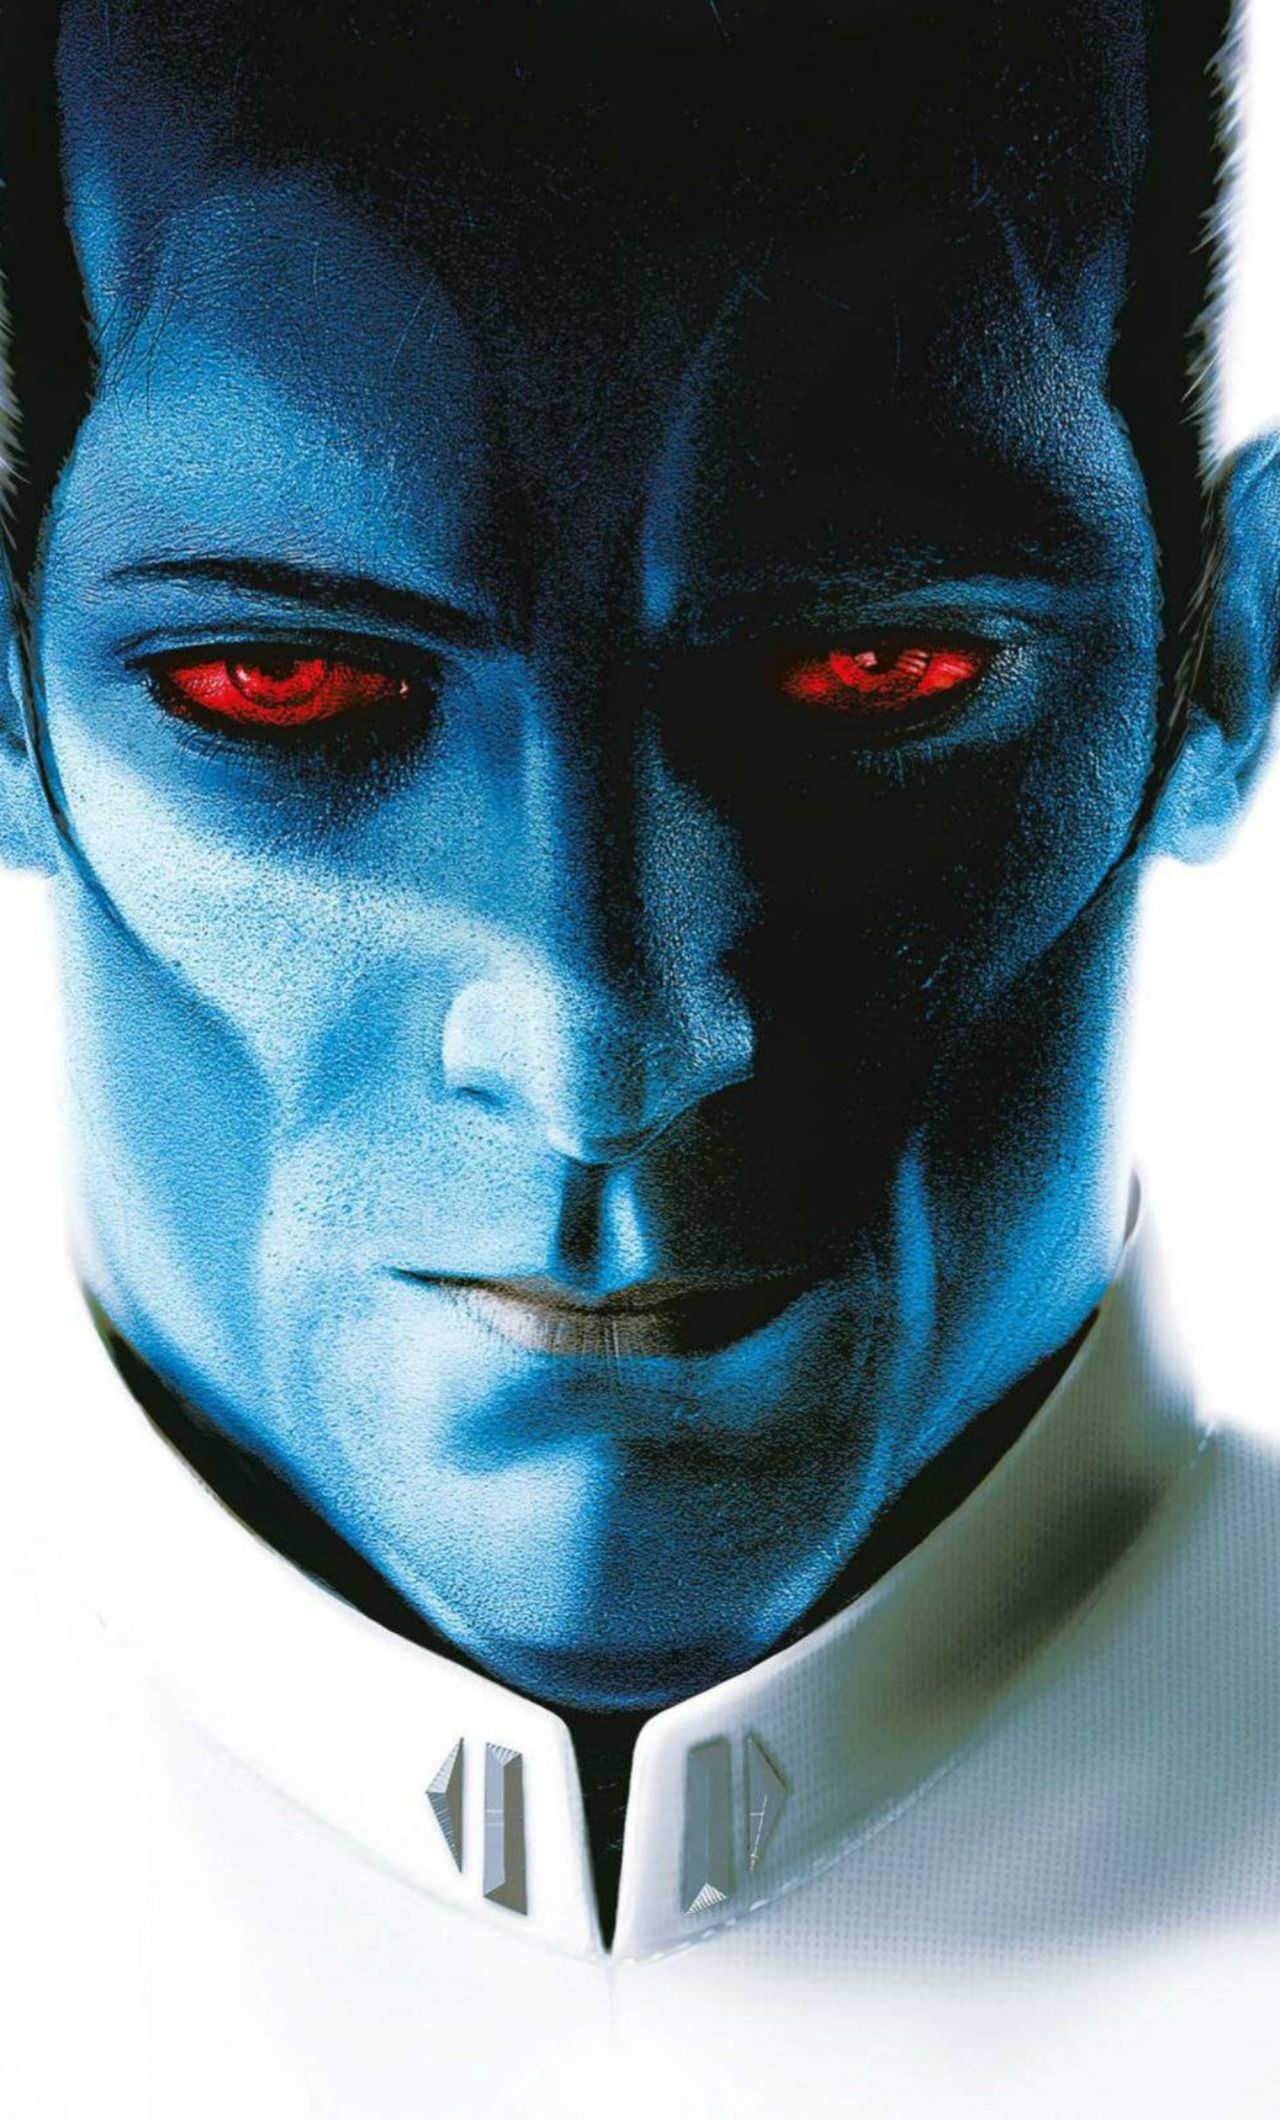 Grand Admiral Thrawn Star Wars Rebels iPhone 6 plus Wallpaper, HD TV Series 4K Wallpaper, Image, Photo and Background